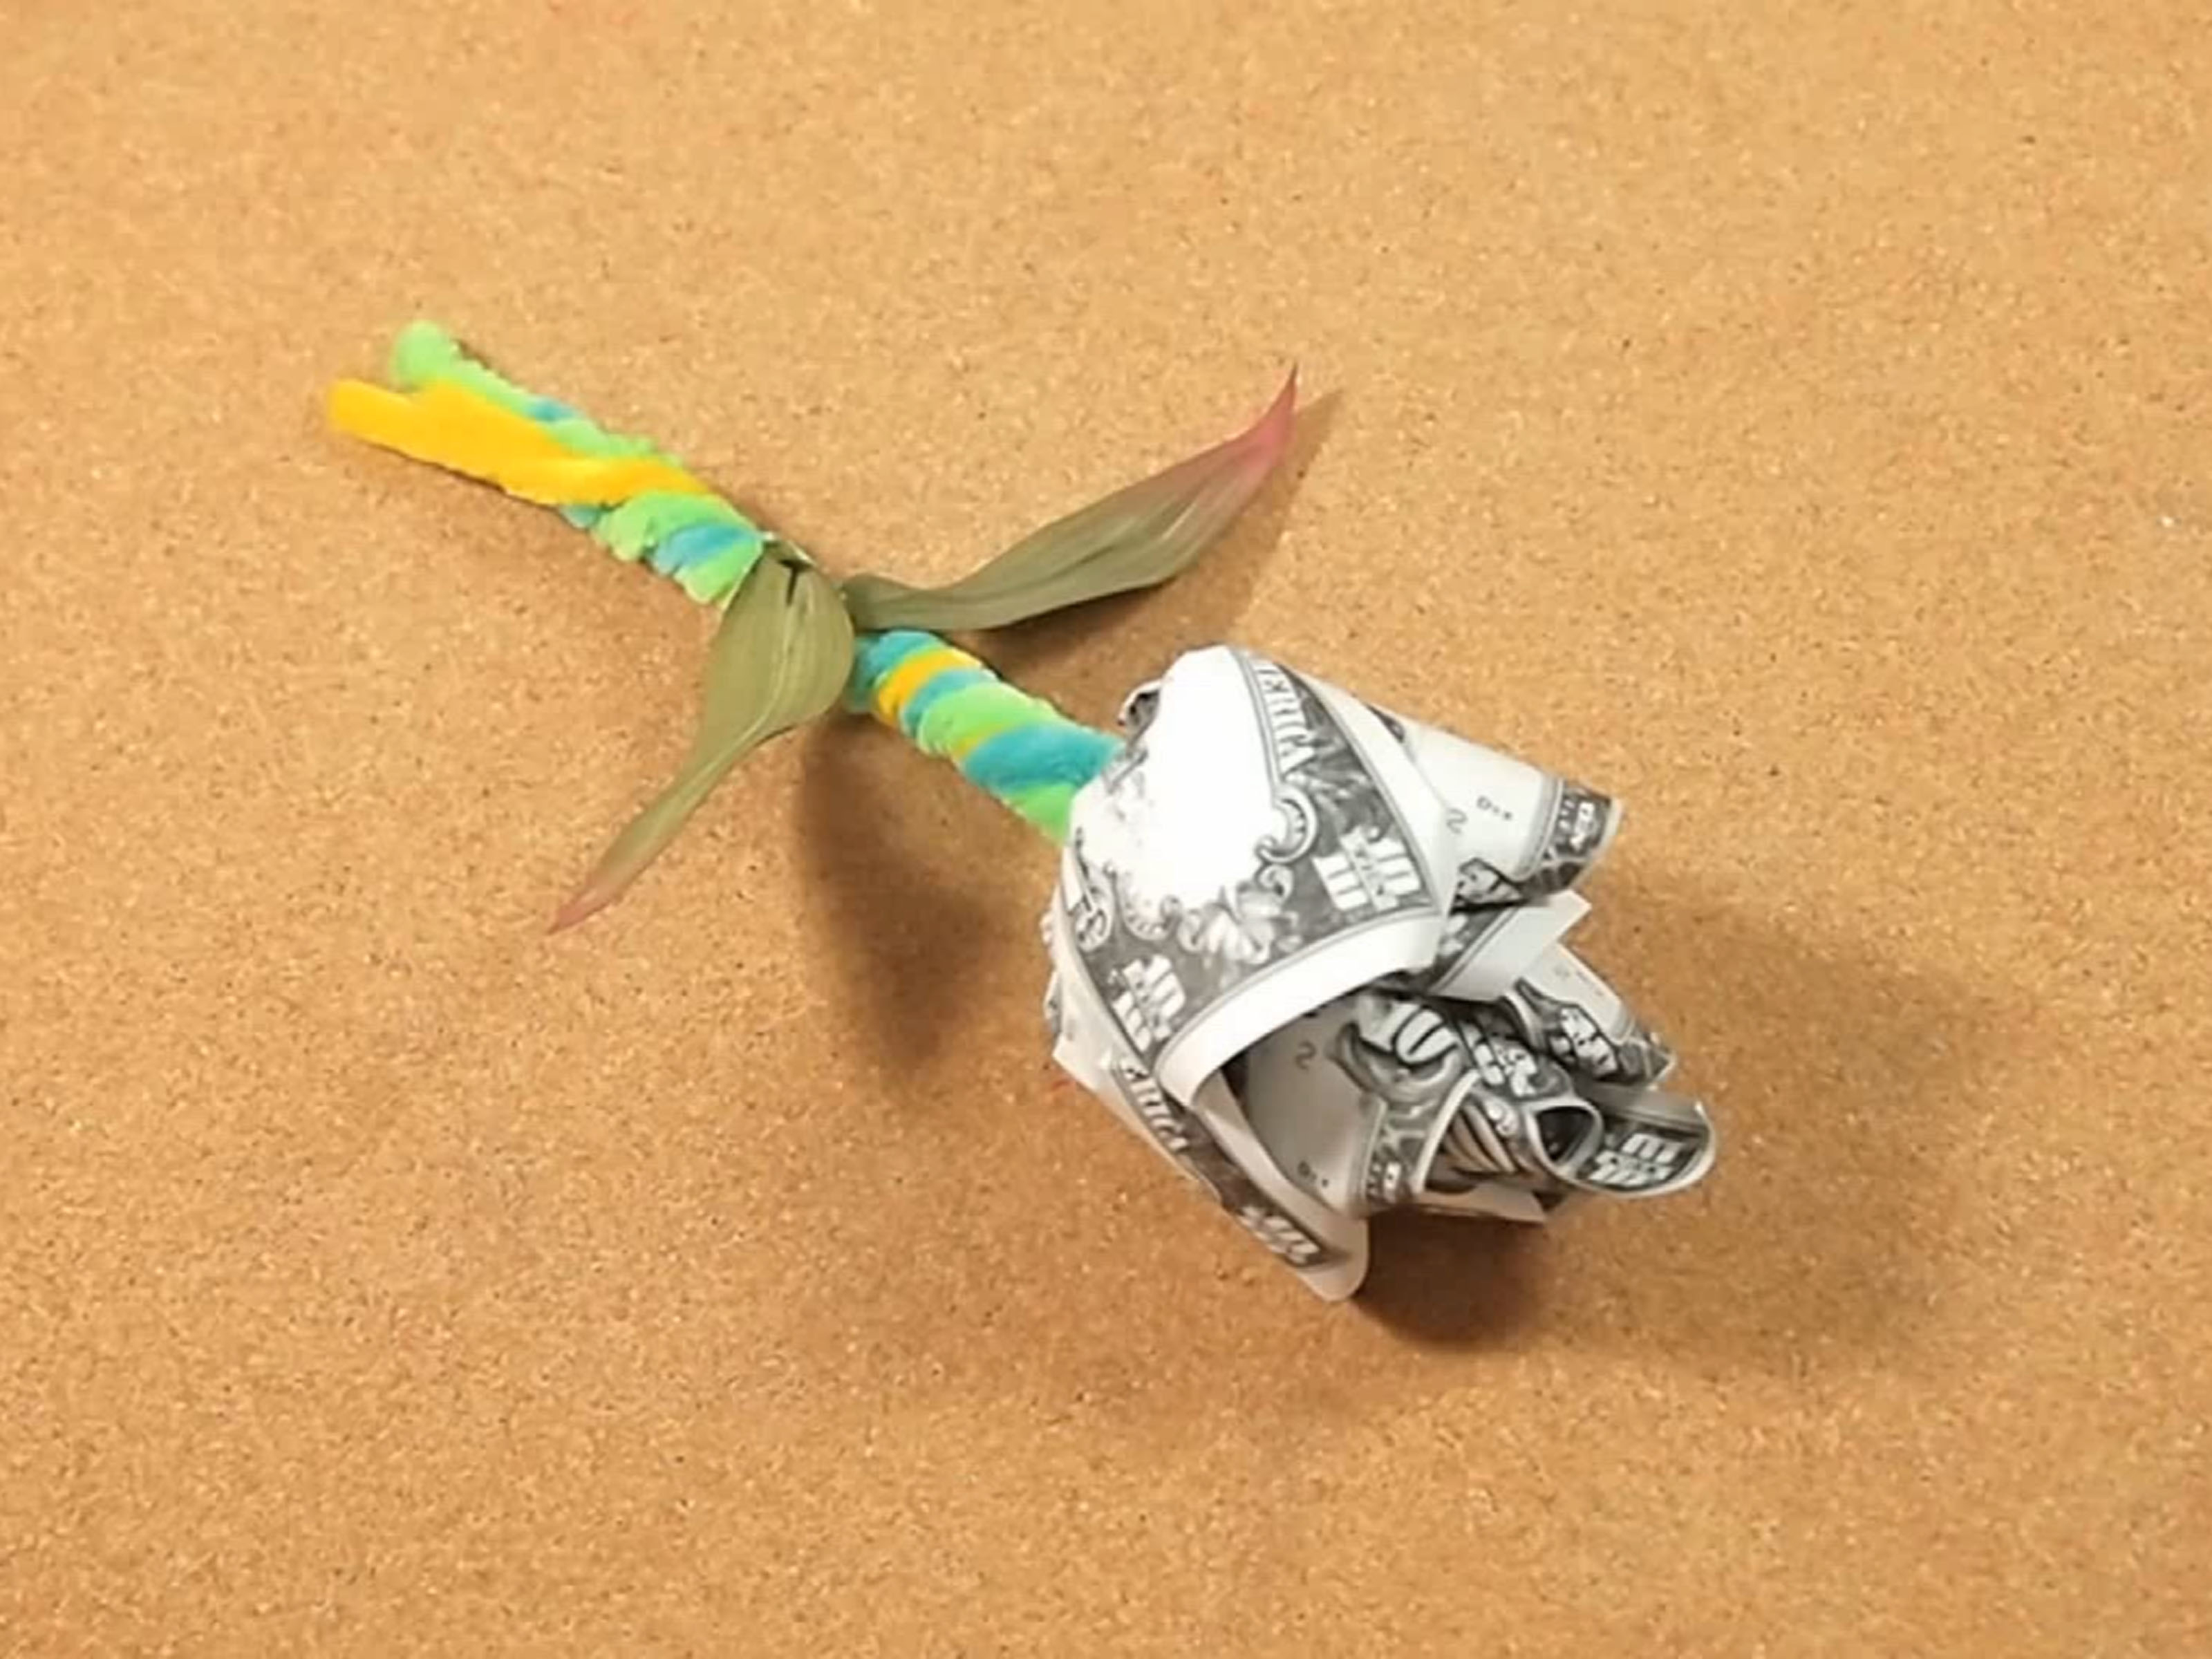 How To Make An Origami Rose Out Of Money How To Make A Dollar Bill Rose 7 Steps With Pictures Wikihow